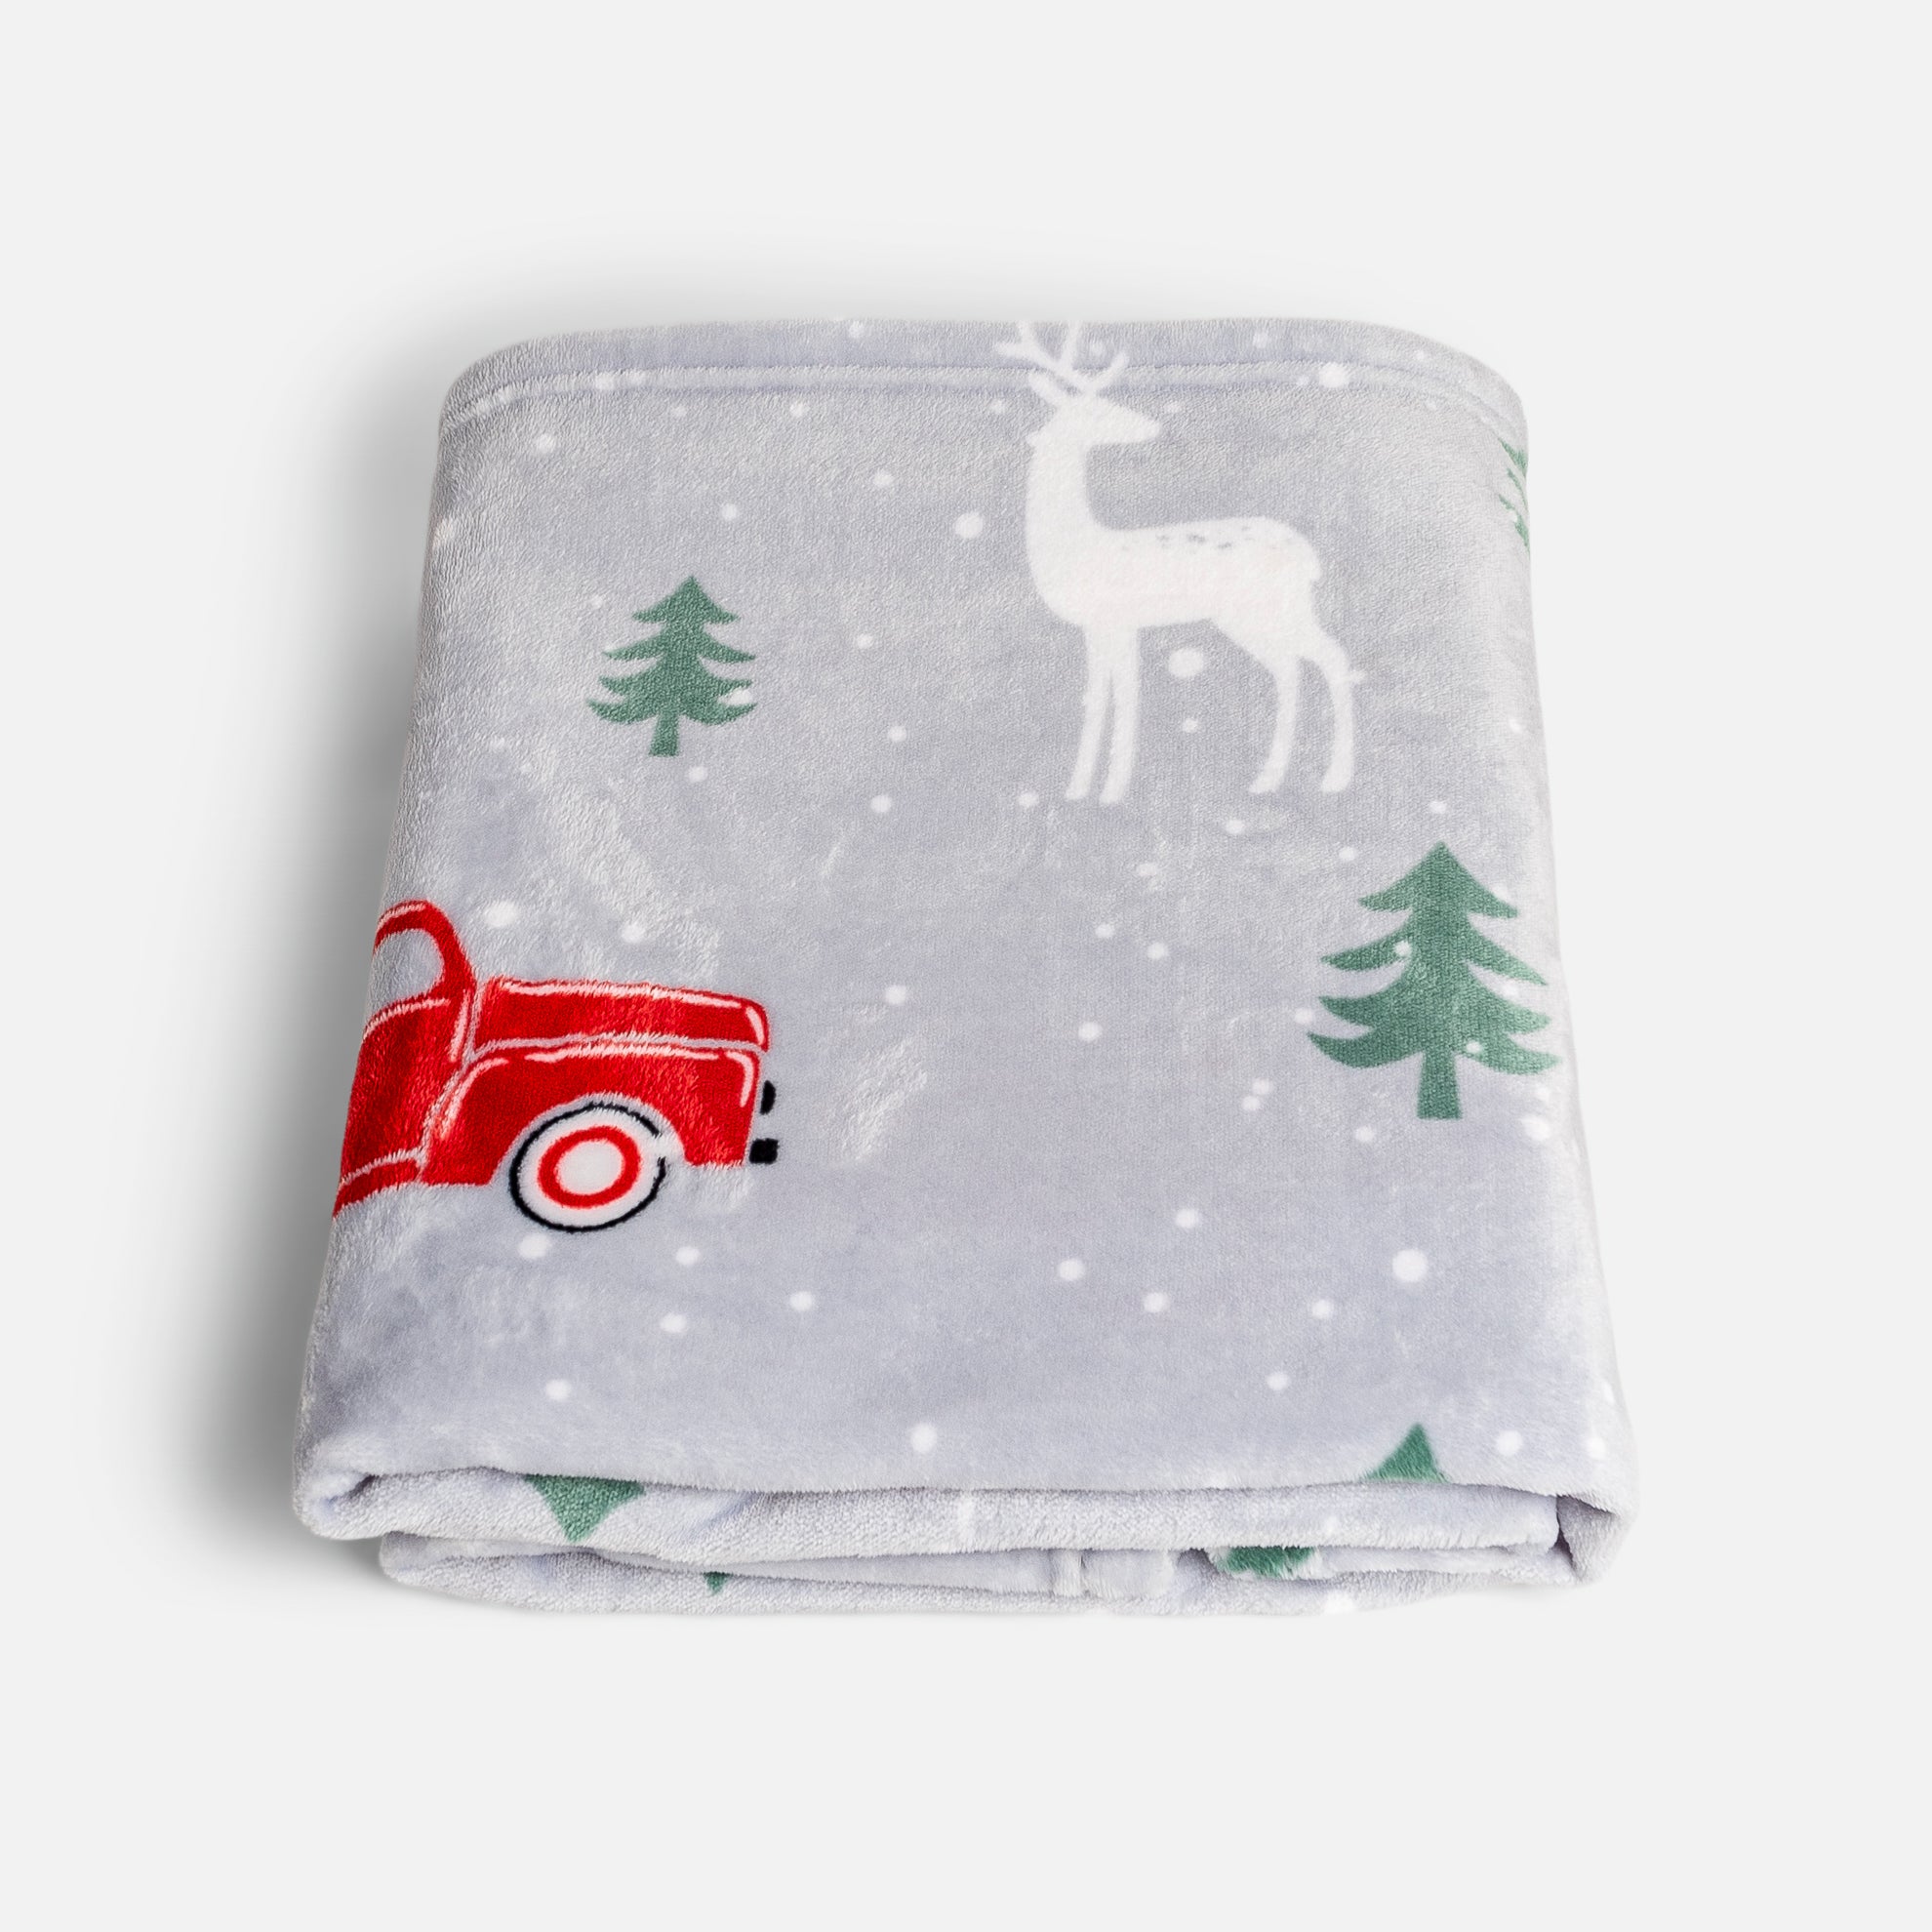 Soft grey throw with trucks and deer